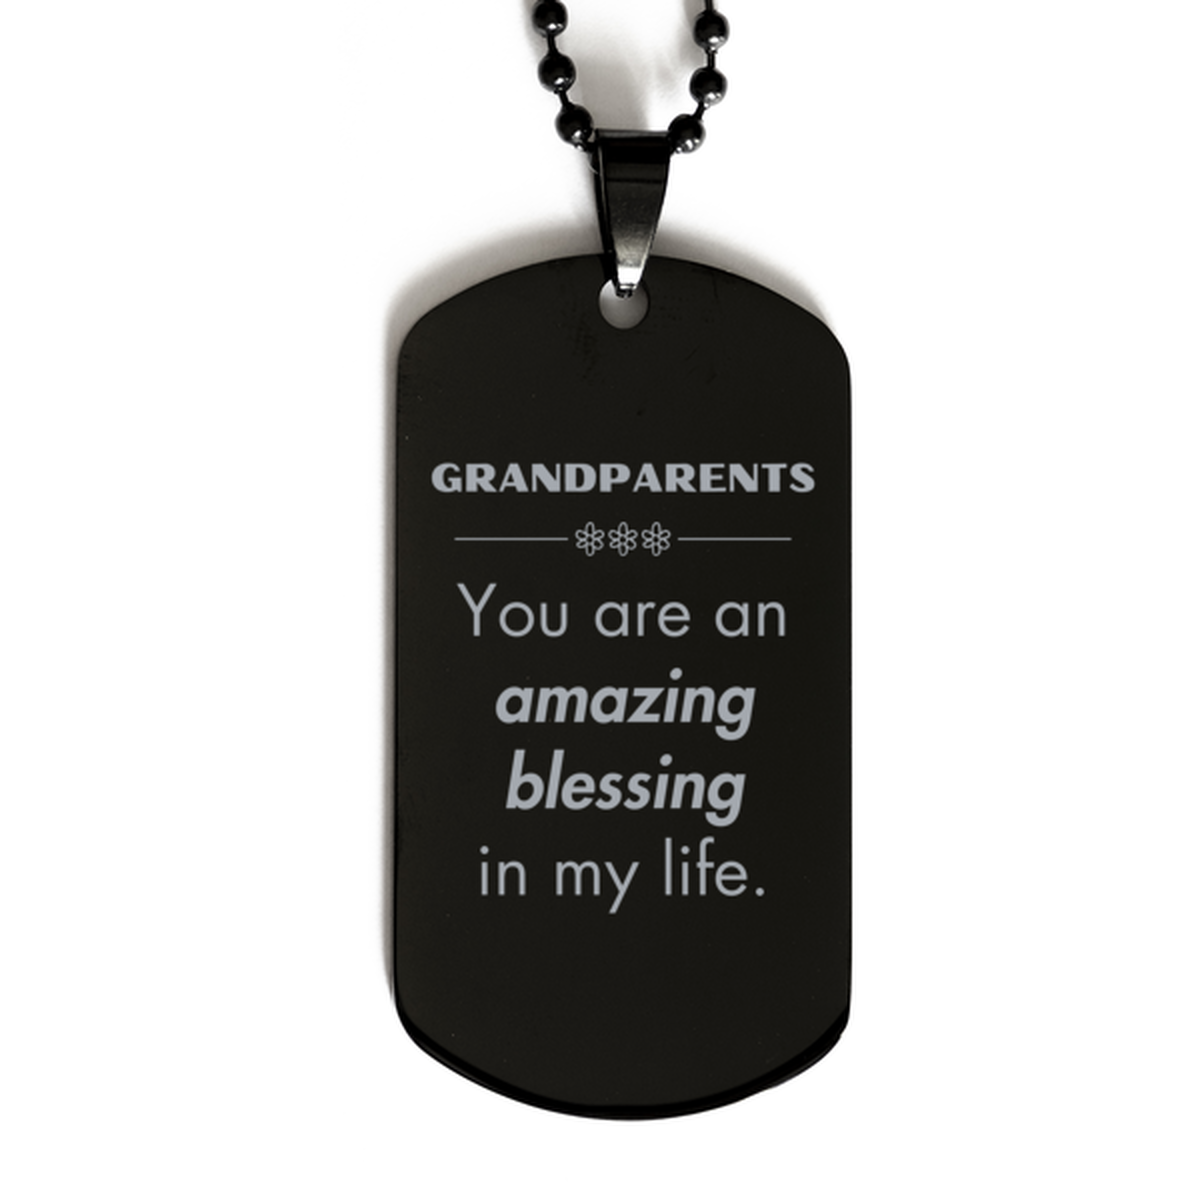 Grandparents Black Dog Tag, You are an amazing blessing in my life, Thank You Gifts For Grandparents, Inspirational Birthday Christmas Unique Gifts For Grandparents